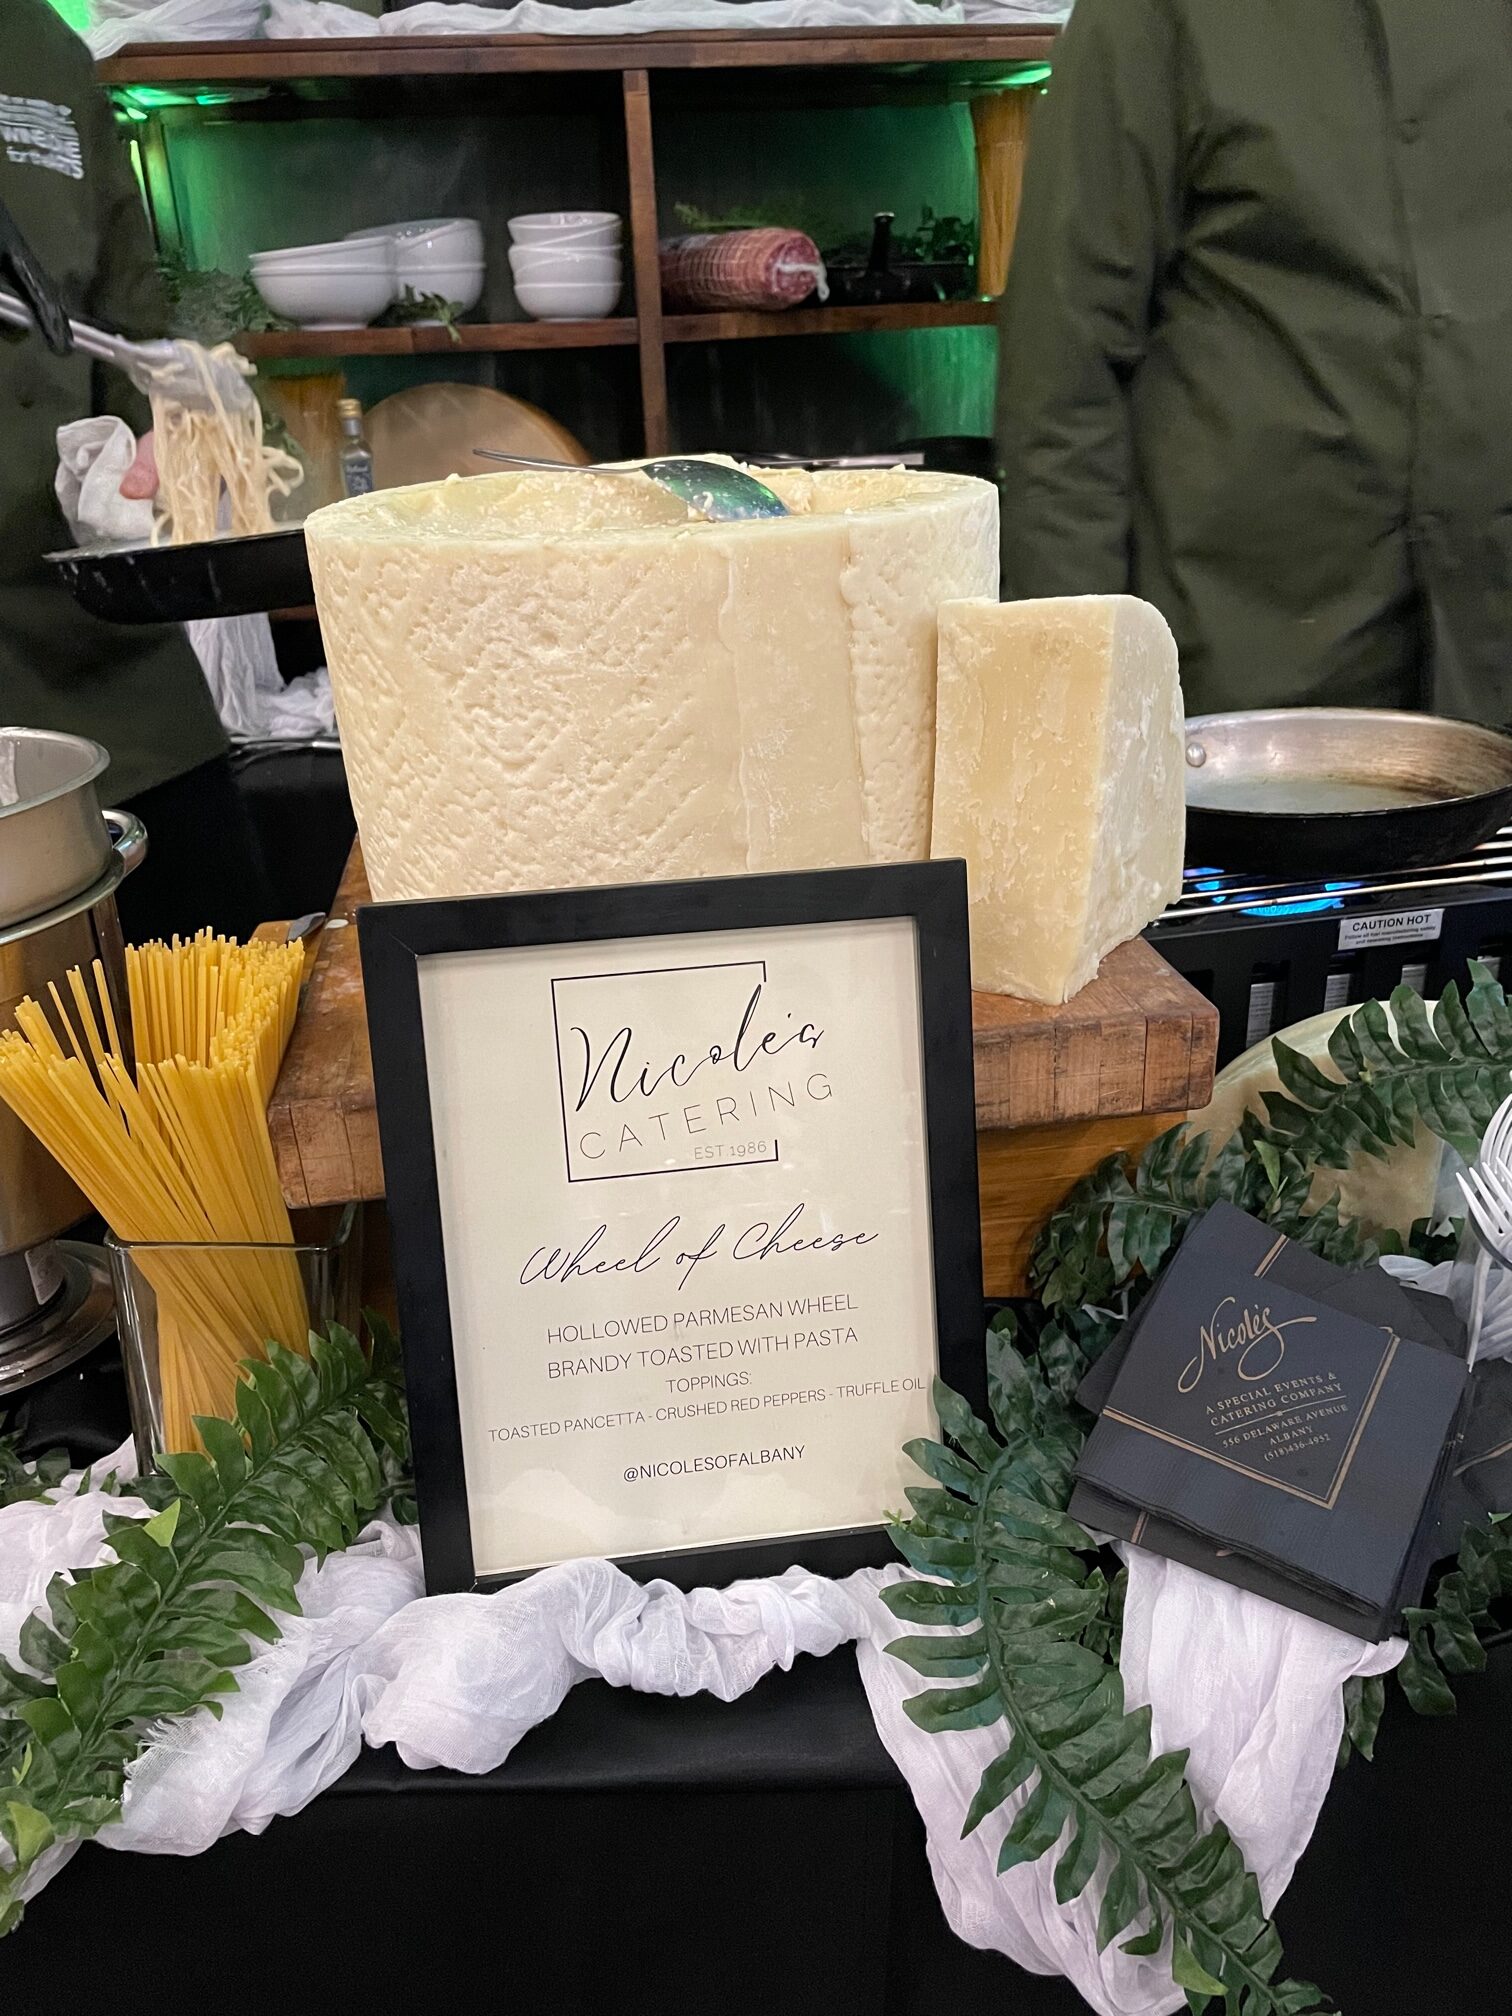 Giant parmesan cheese wheel at Nicole's station at the 2023 Albany Chef's Food and Wine Festival.